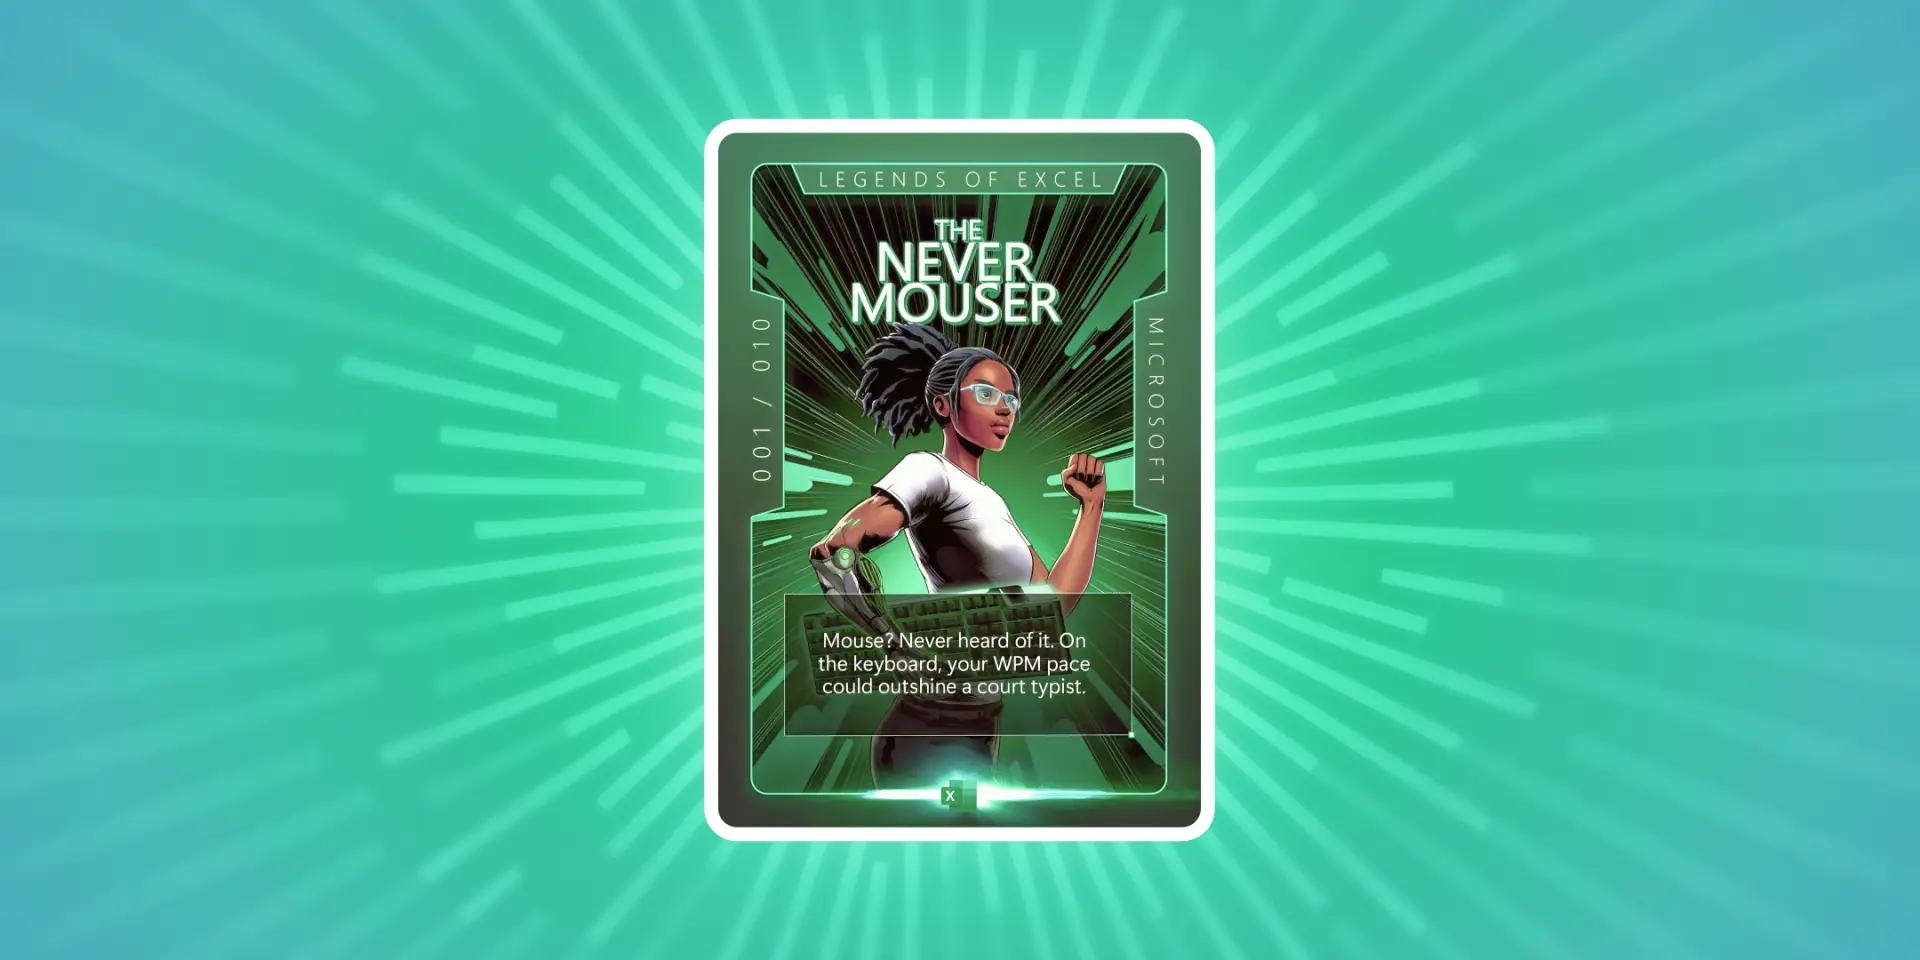 A trading card featuring the Excel Legend known as Never Mouser